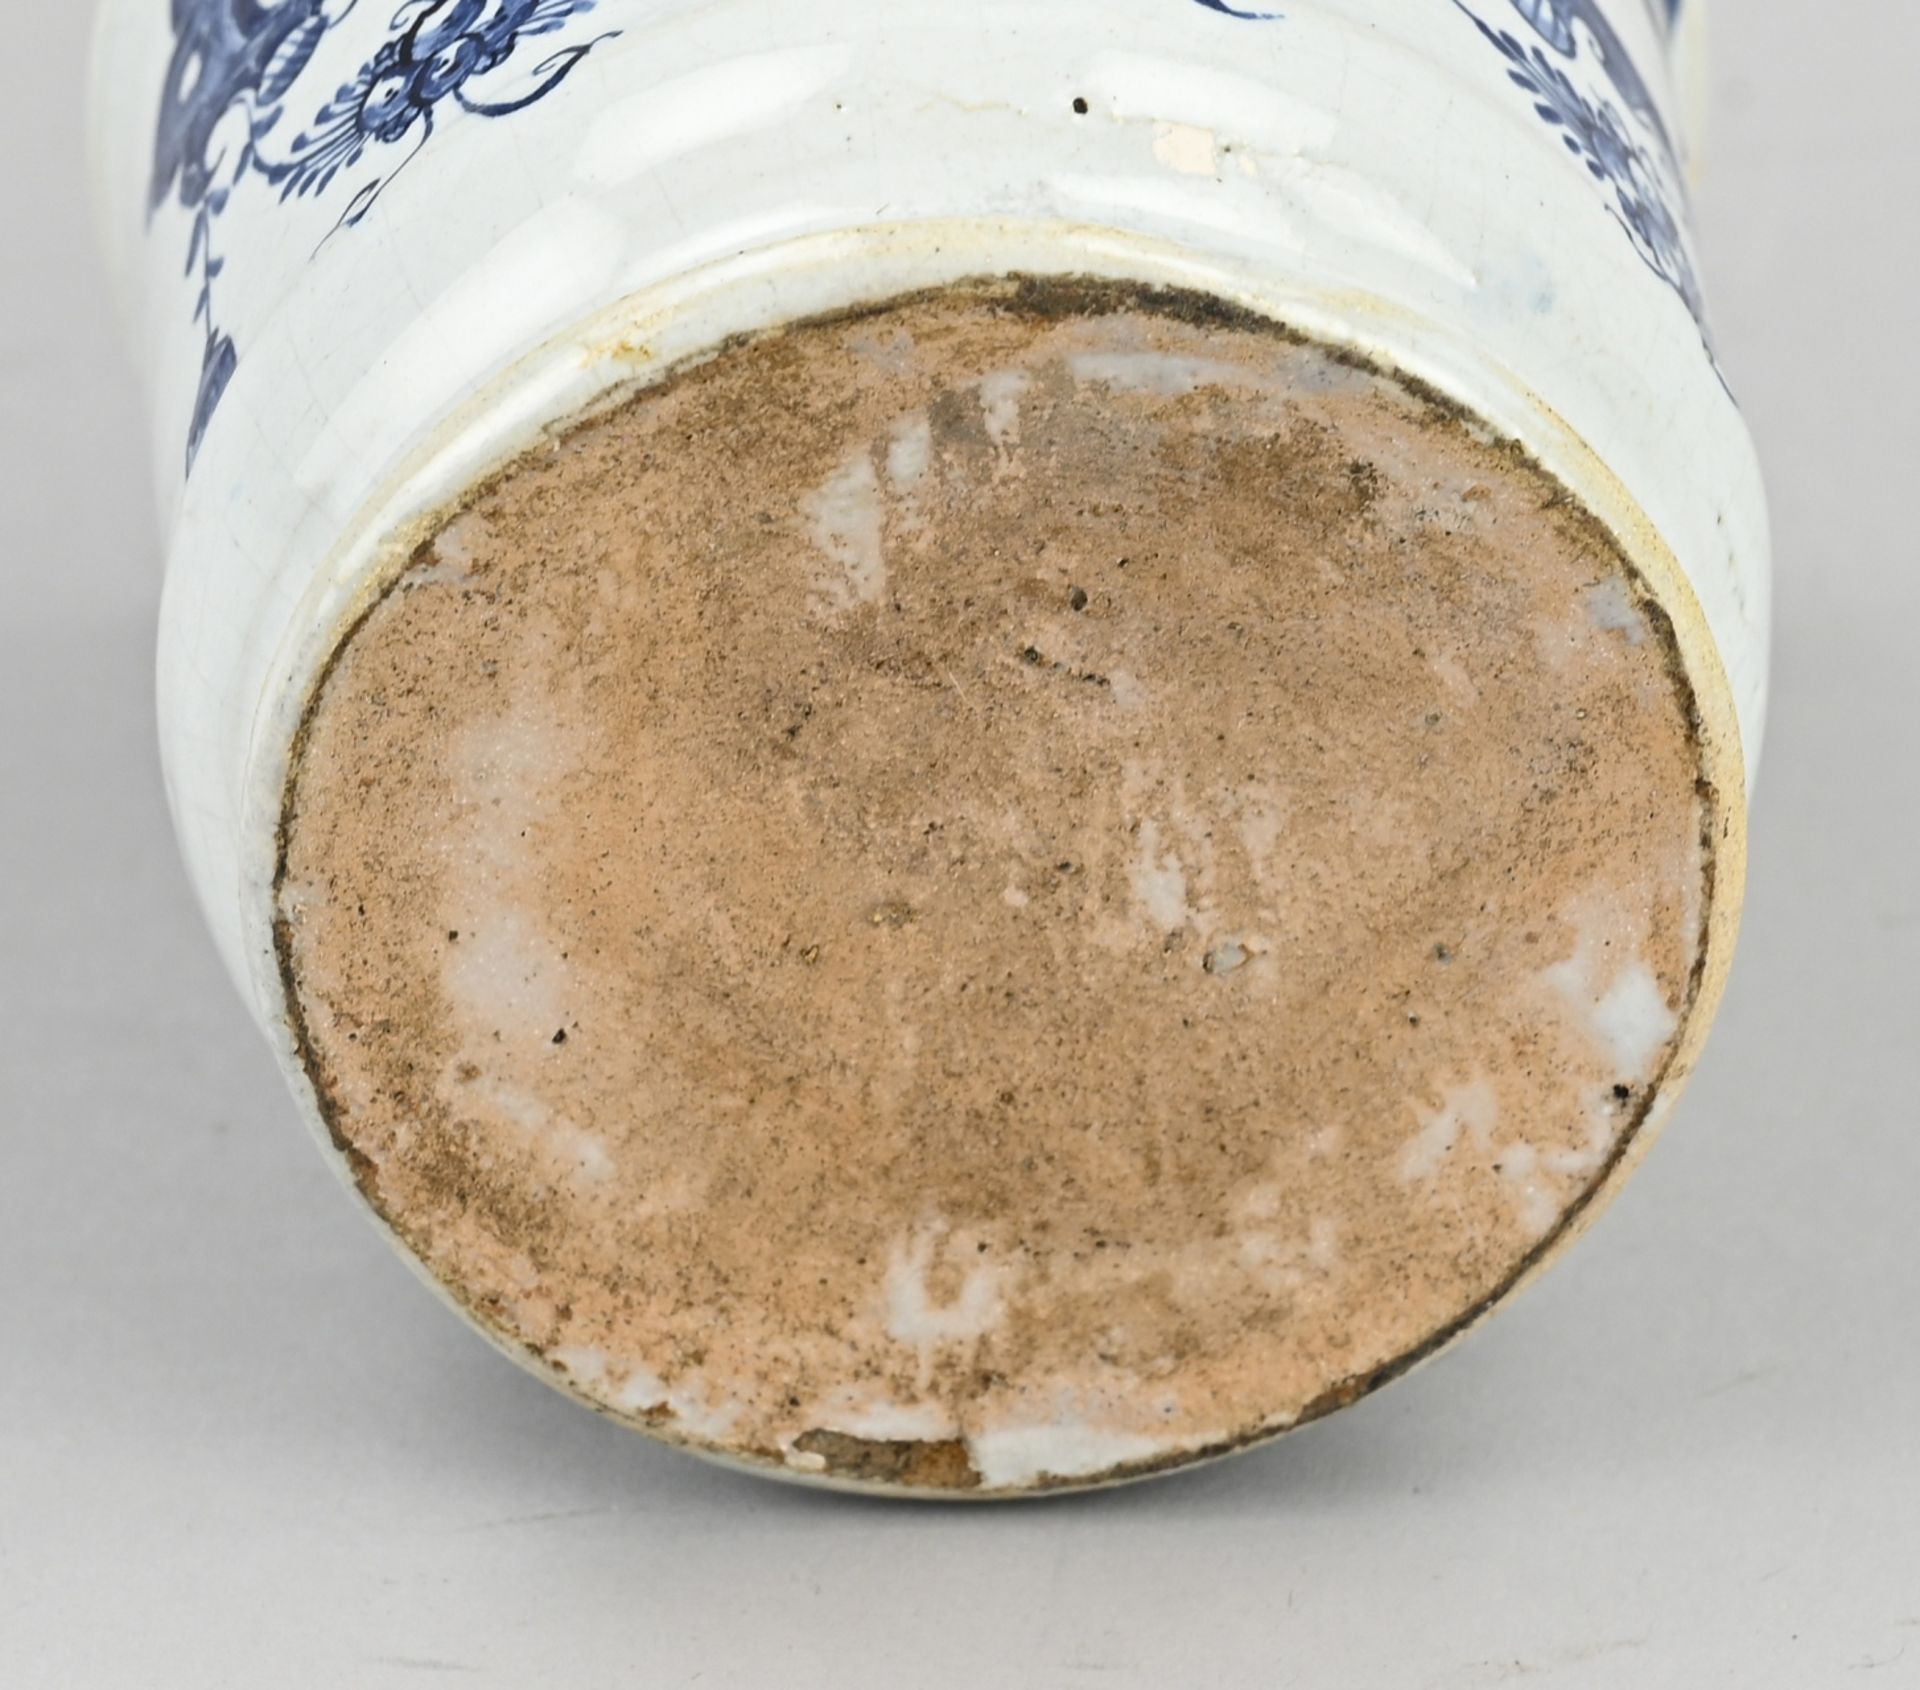 Delft apothecary jar - Image 2 of 2